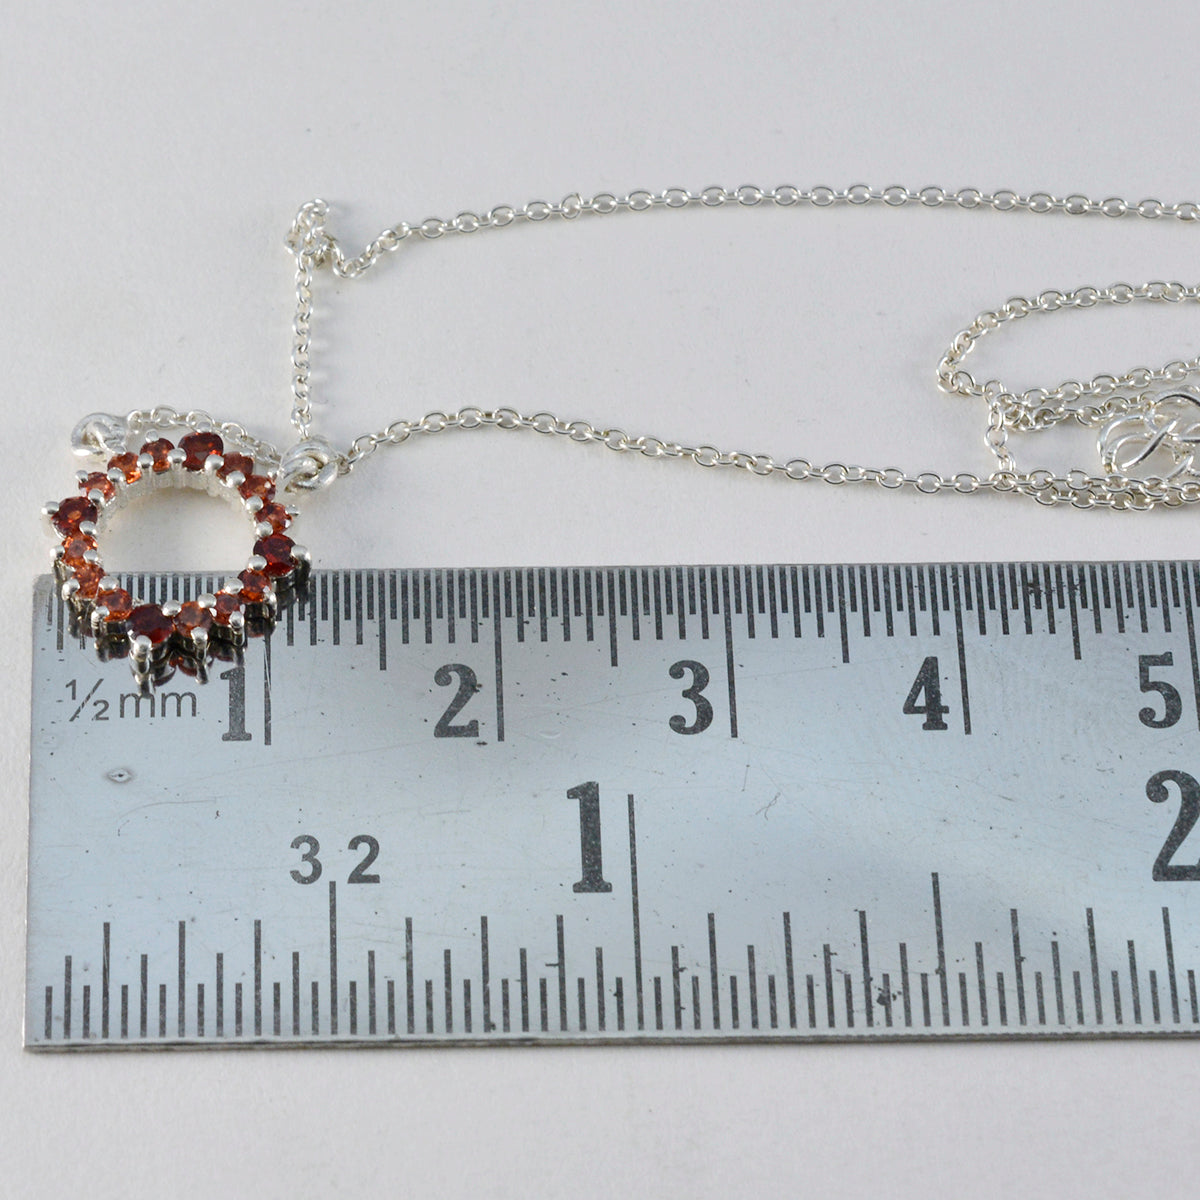 Riyo Knockout Gemstone Round Faceted Red Garnet Sterling Silver Pendant Gift For Friend